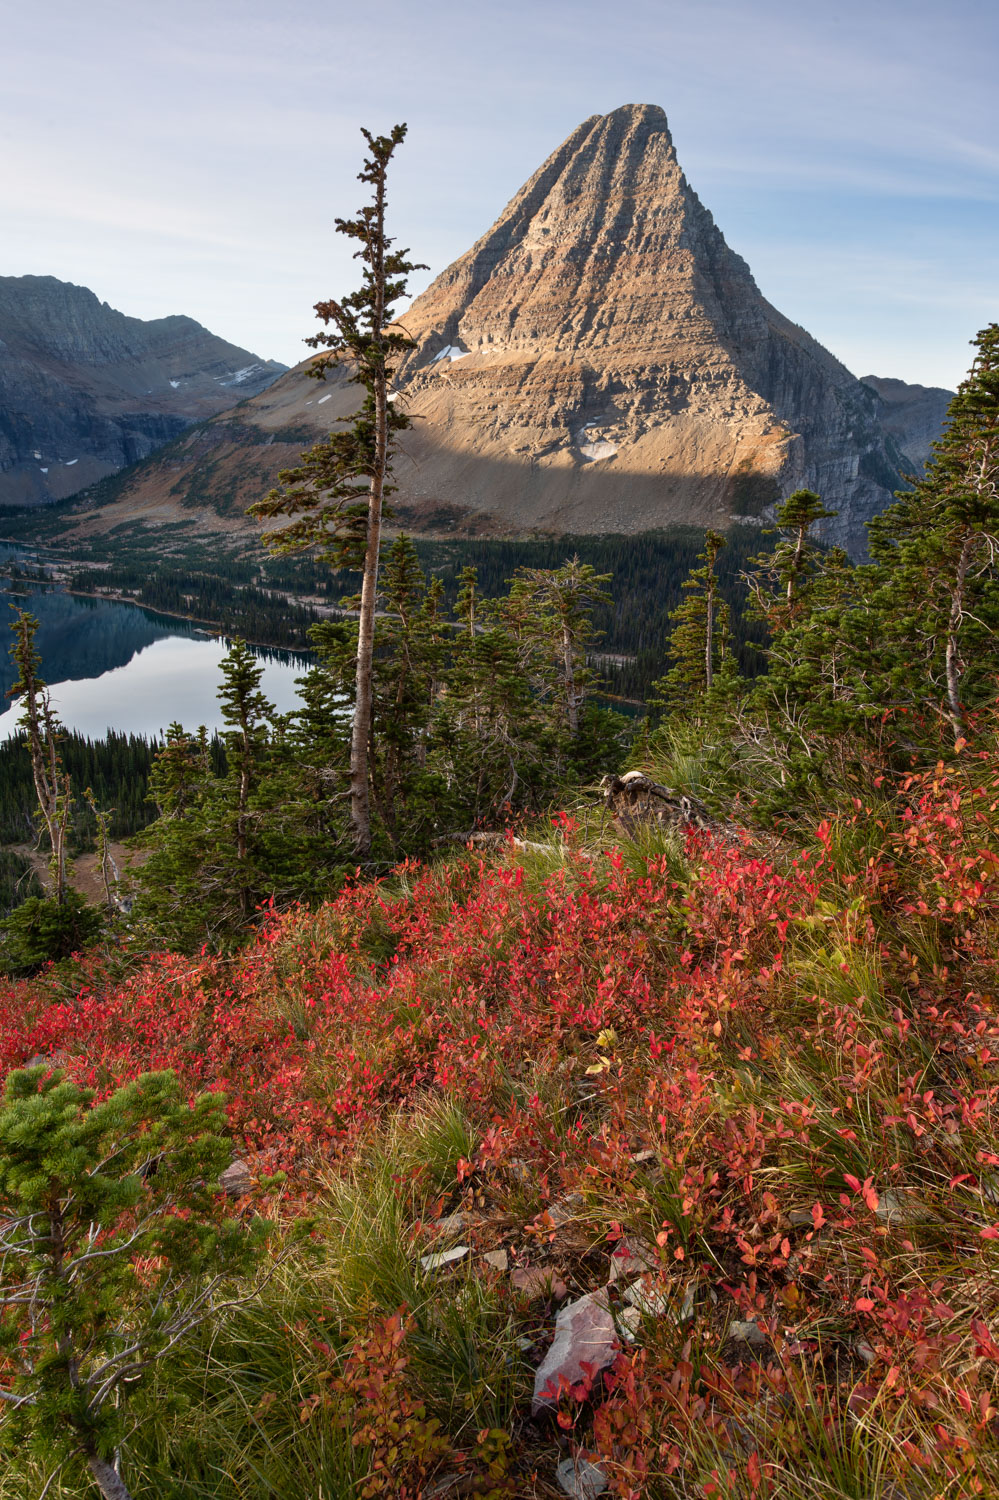 Bearhat Mountain in Glacier National Park is lit up by the morning sun with autumn red huckleberry bushes in the foreground.